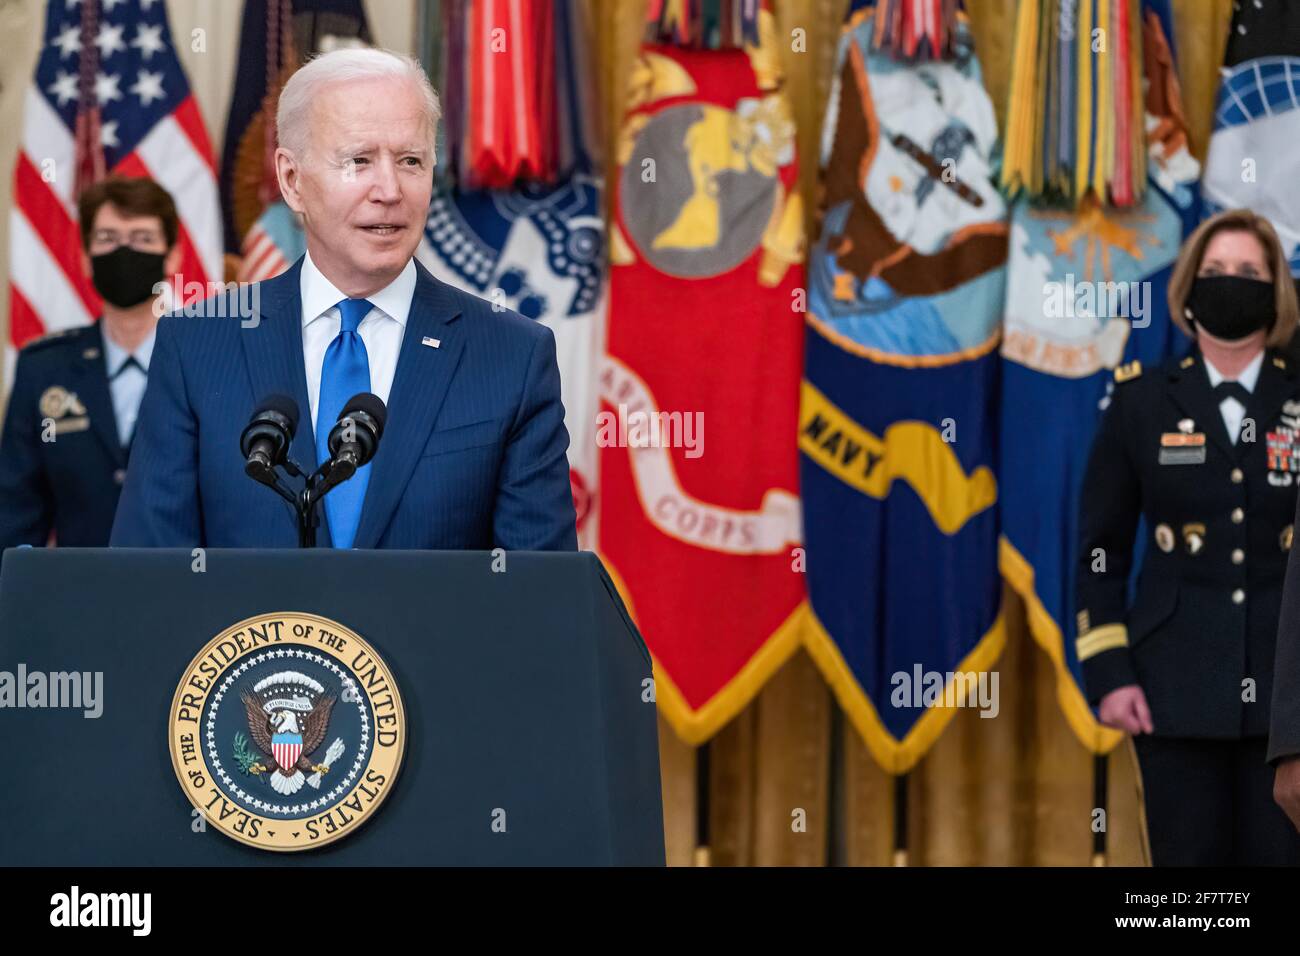 President Joe Biden, joined by Vice President Kamala Harris, Secretary of Defense Lloyd Austin, U.S. Air Force Gen. Jacqueline Van Ovost, and U.S. Army Lt. Gen. Laura Richardson, delivers remarks during an event to announce the President’s Combatant Commanders nominees Monday, March 8, 2021, in the East Room of the White House. (Official White House Photo by Adam Schultz) Stock Photo